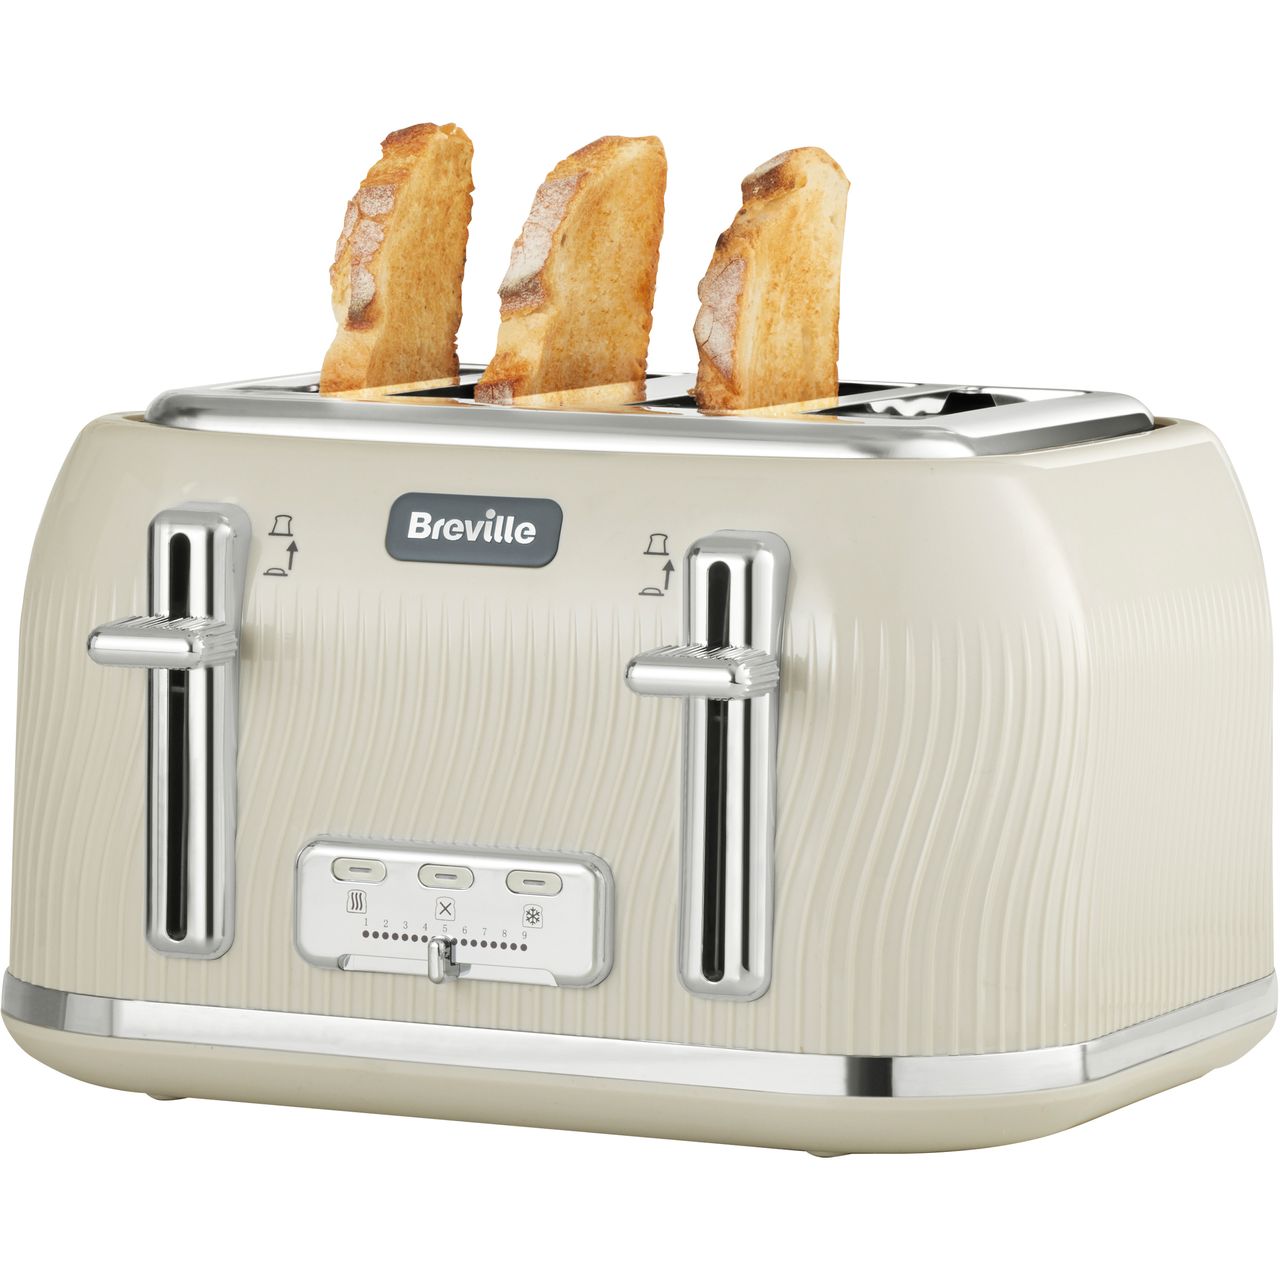 Breville Flow Collection VTT891 4 Slice Toaster Review